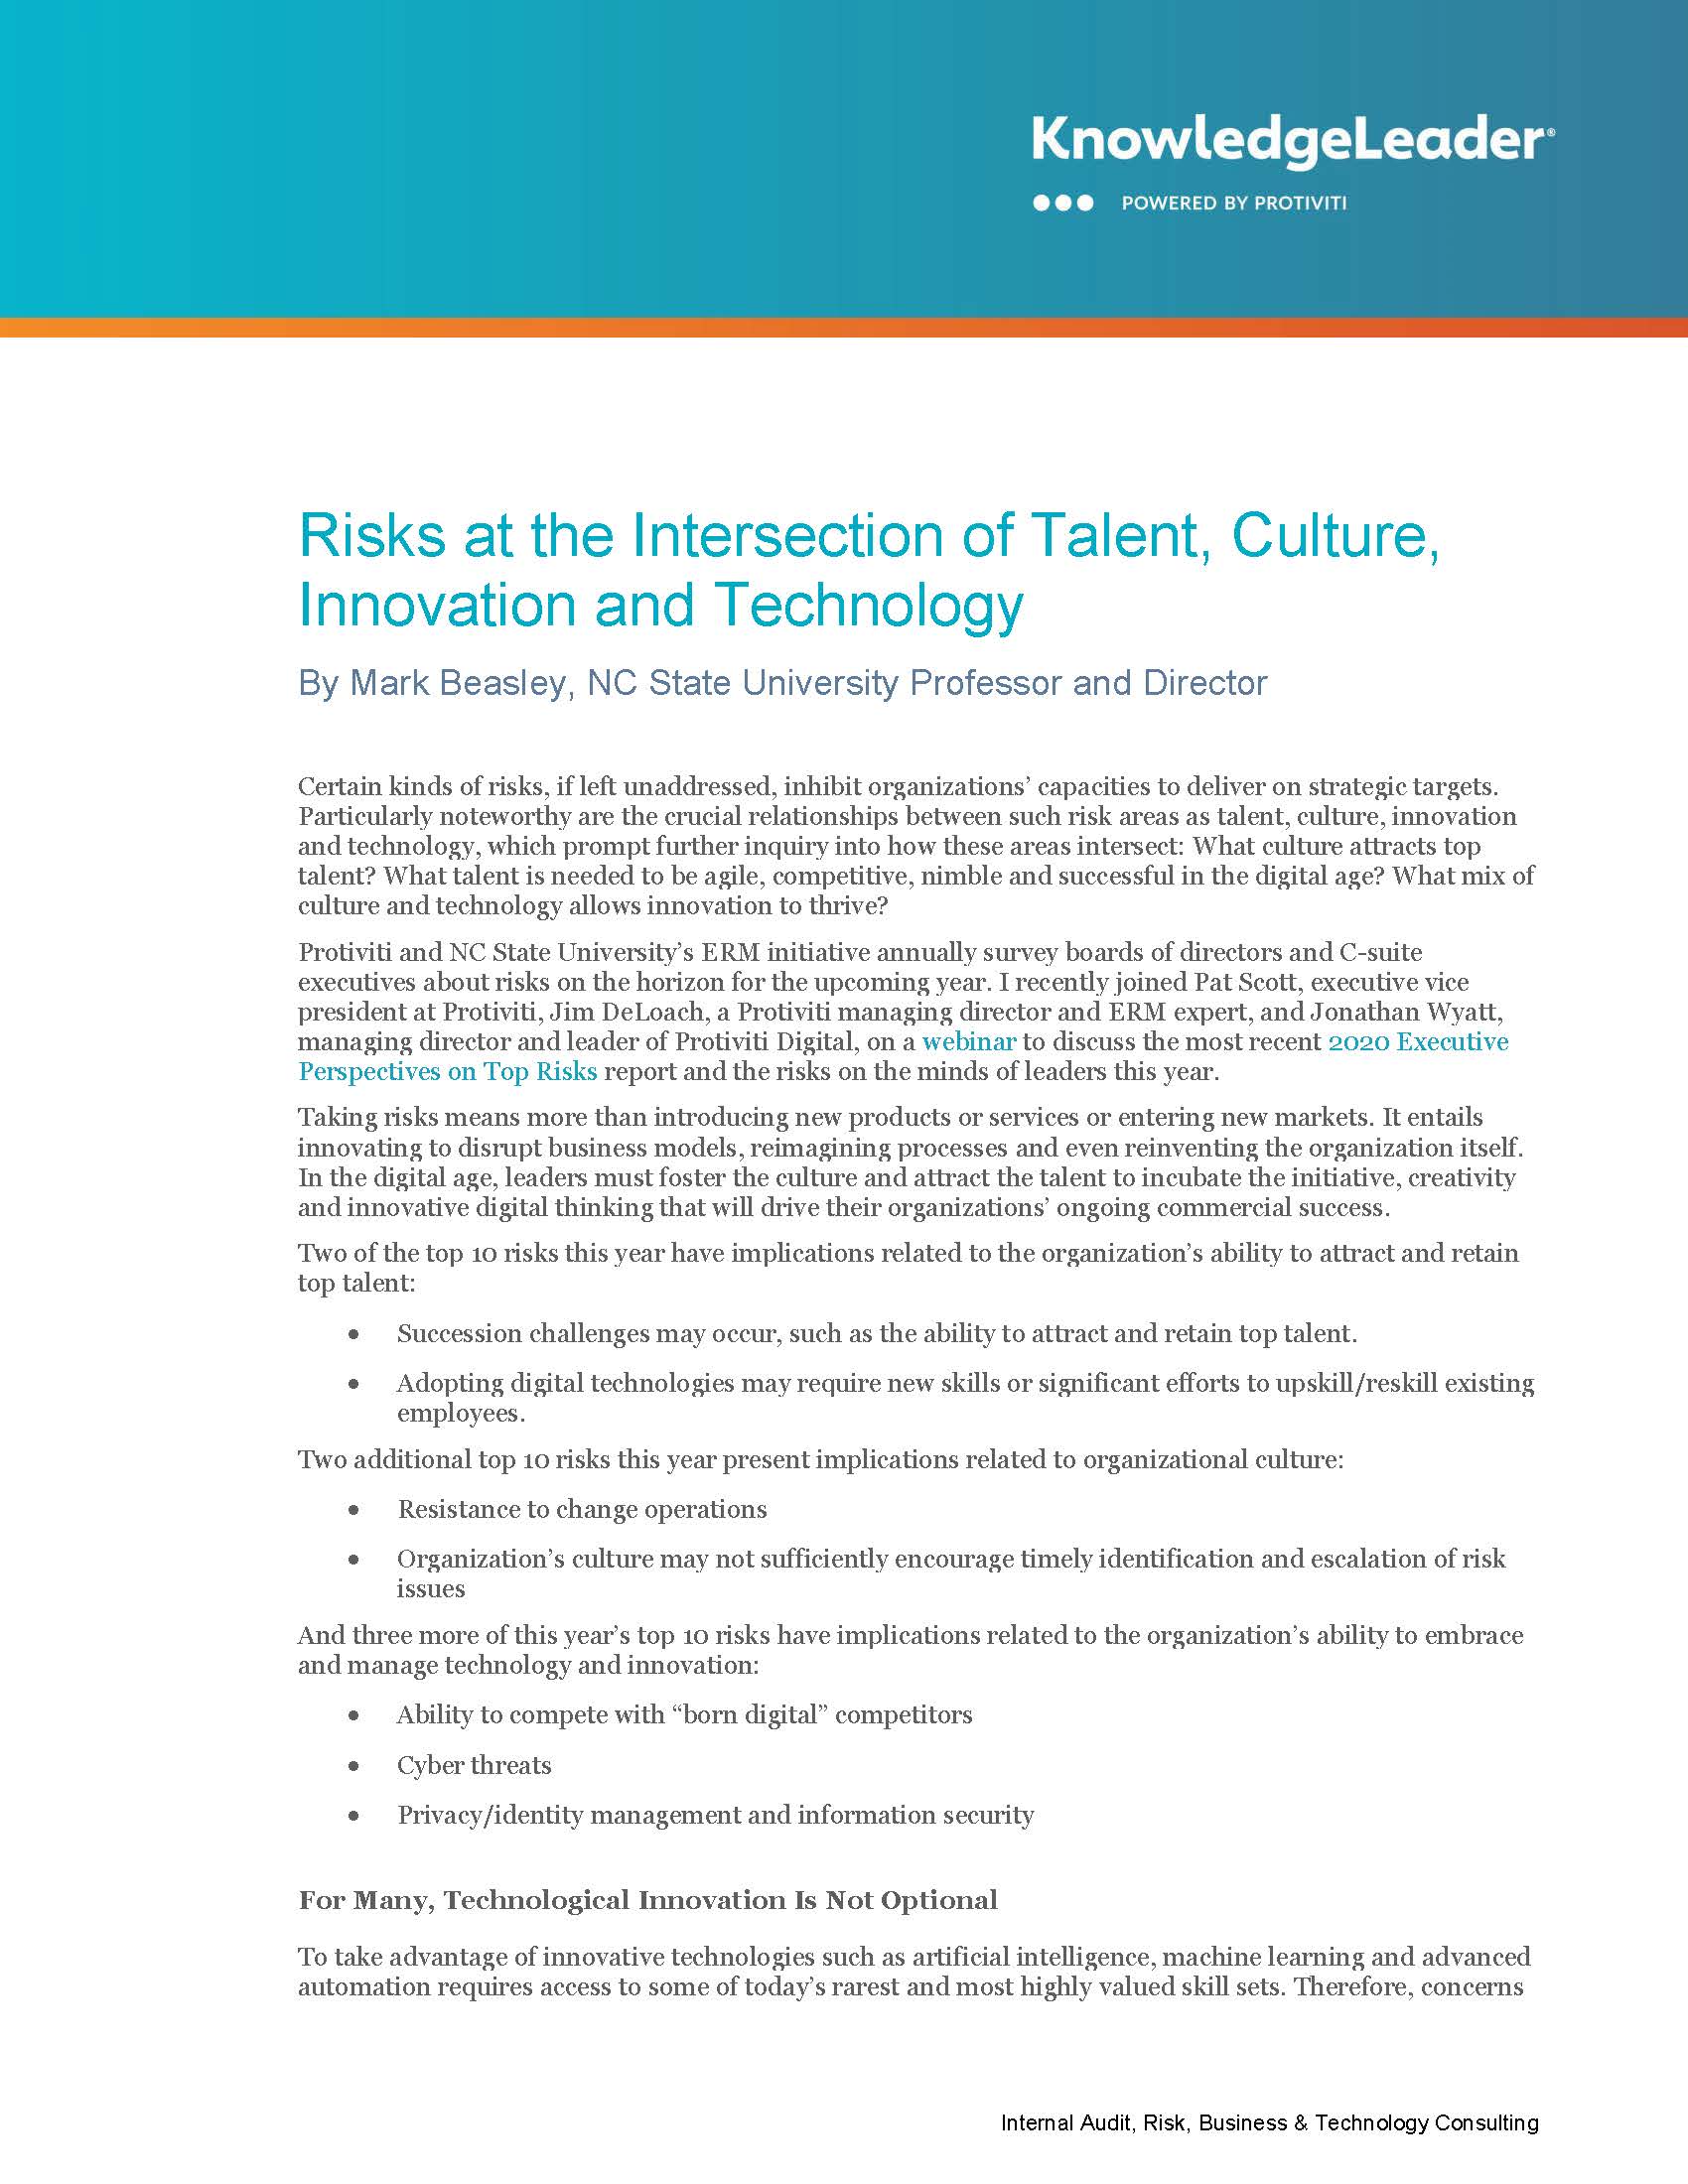 Risks at the Intersection of Talent, Culture, Innovation and Technology